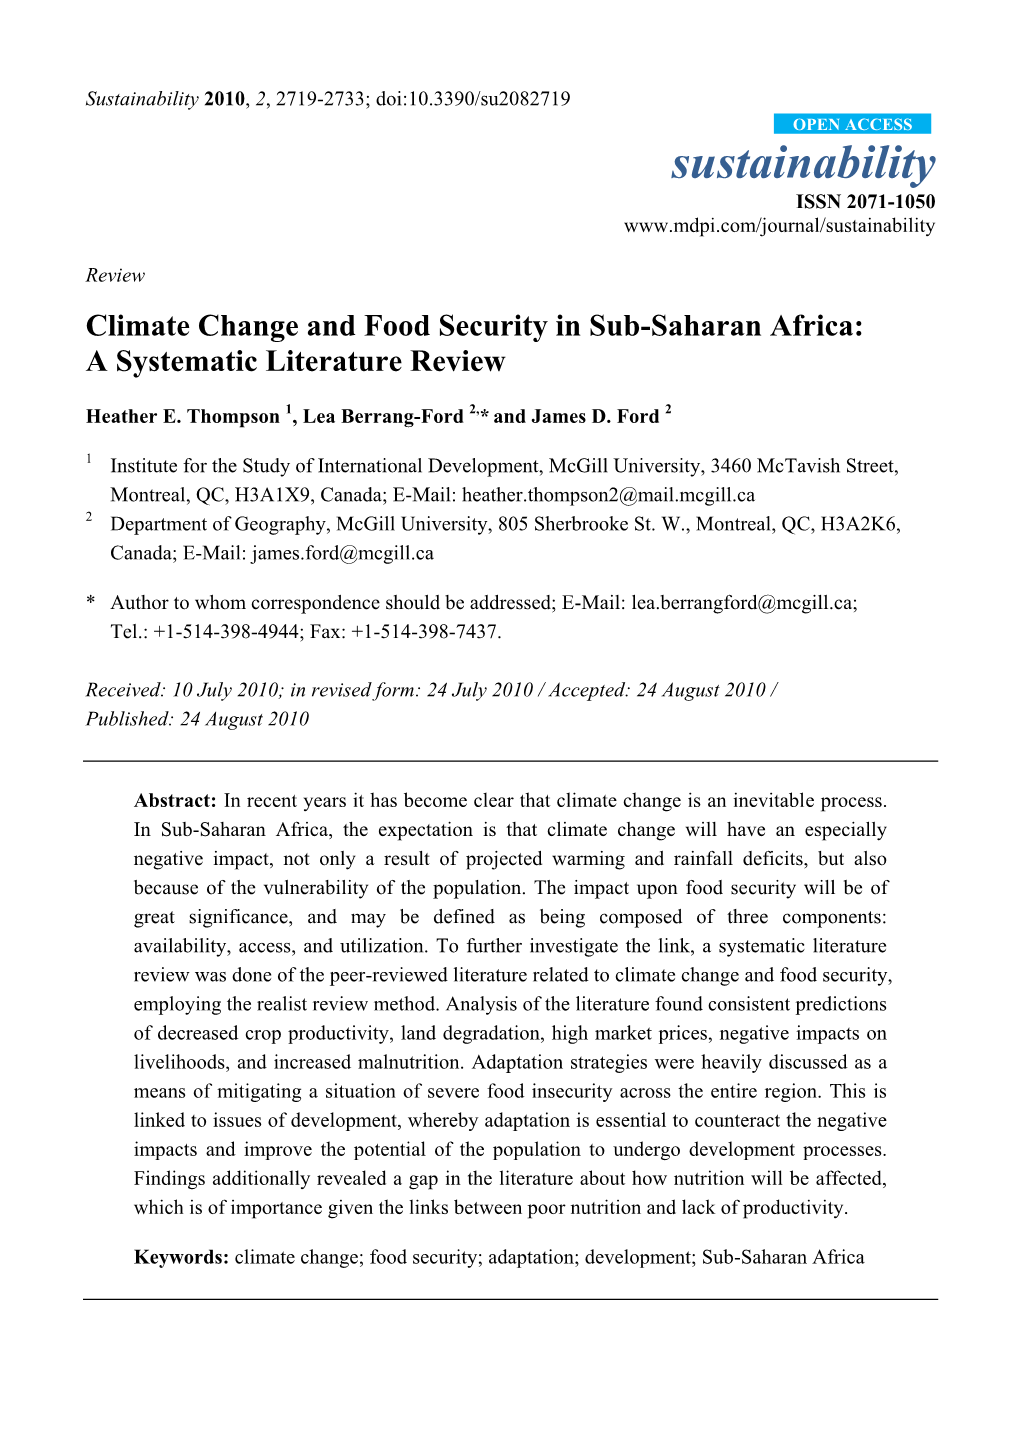 Climate Change and Food Security in Sub-Saharan Africa: a Systematic Literature Review